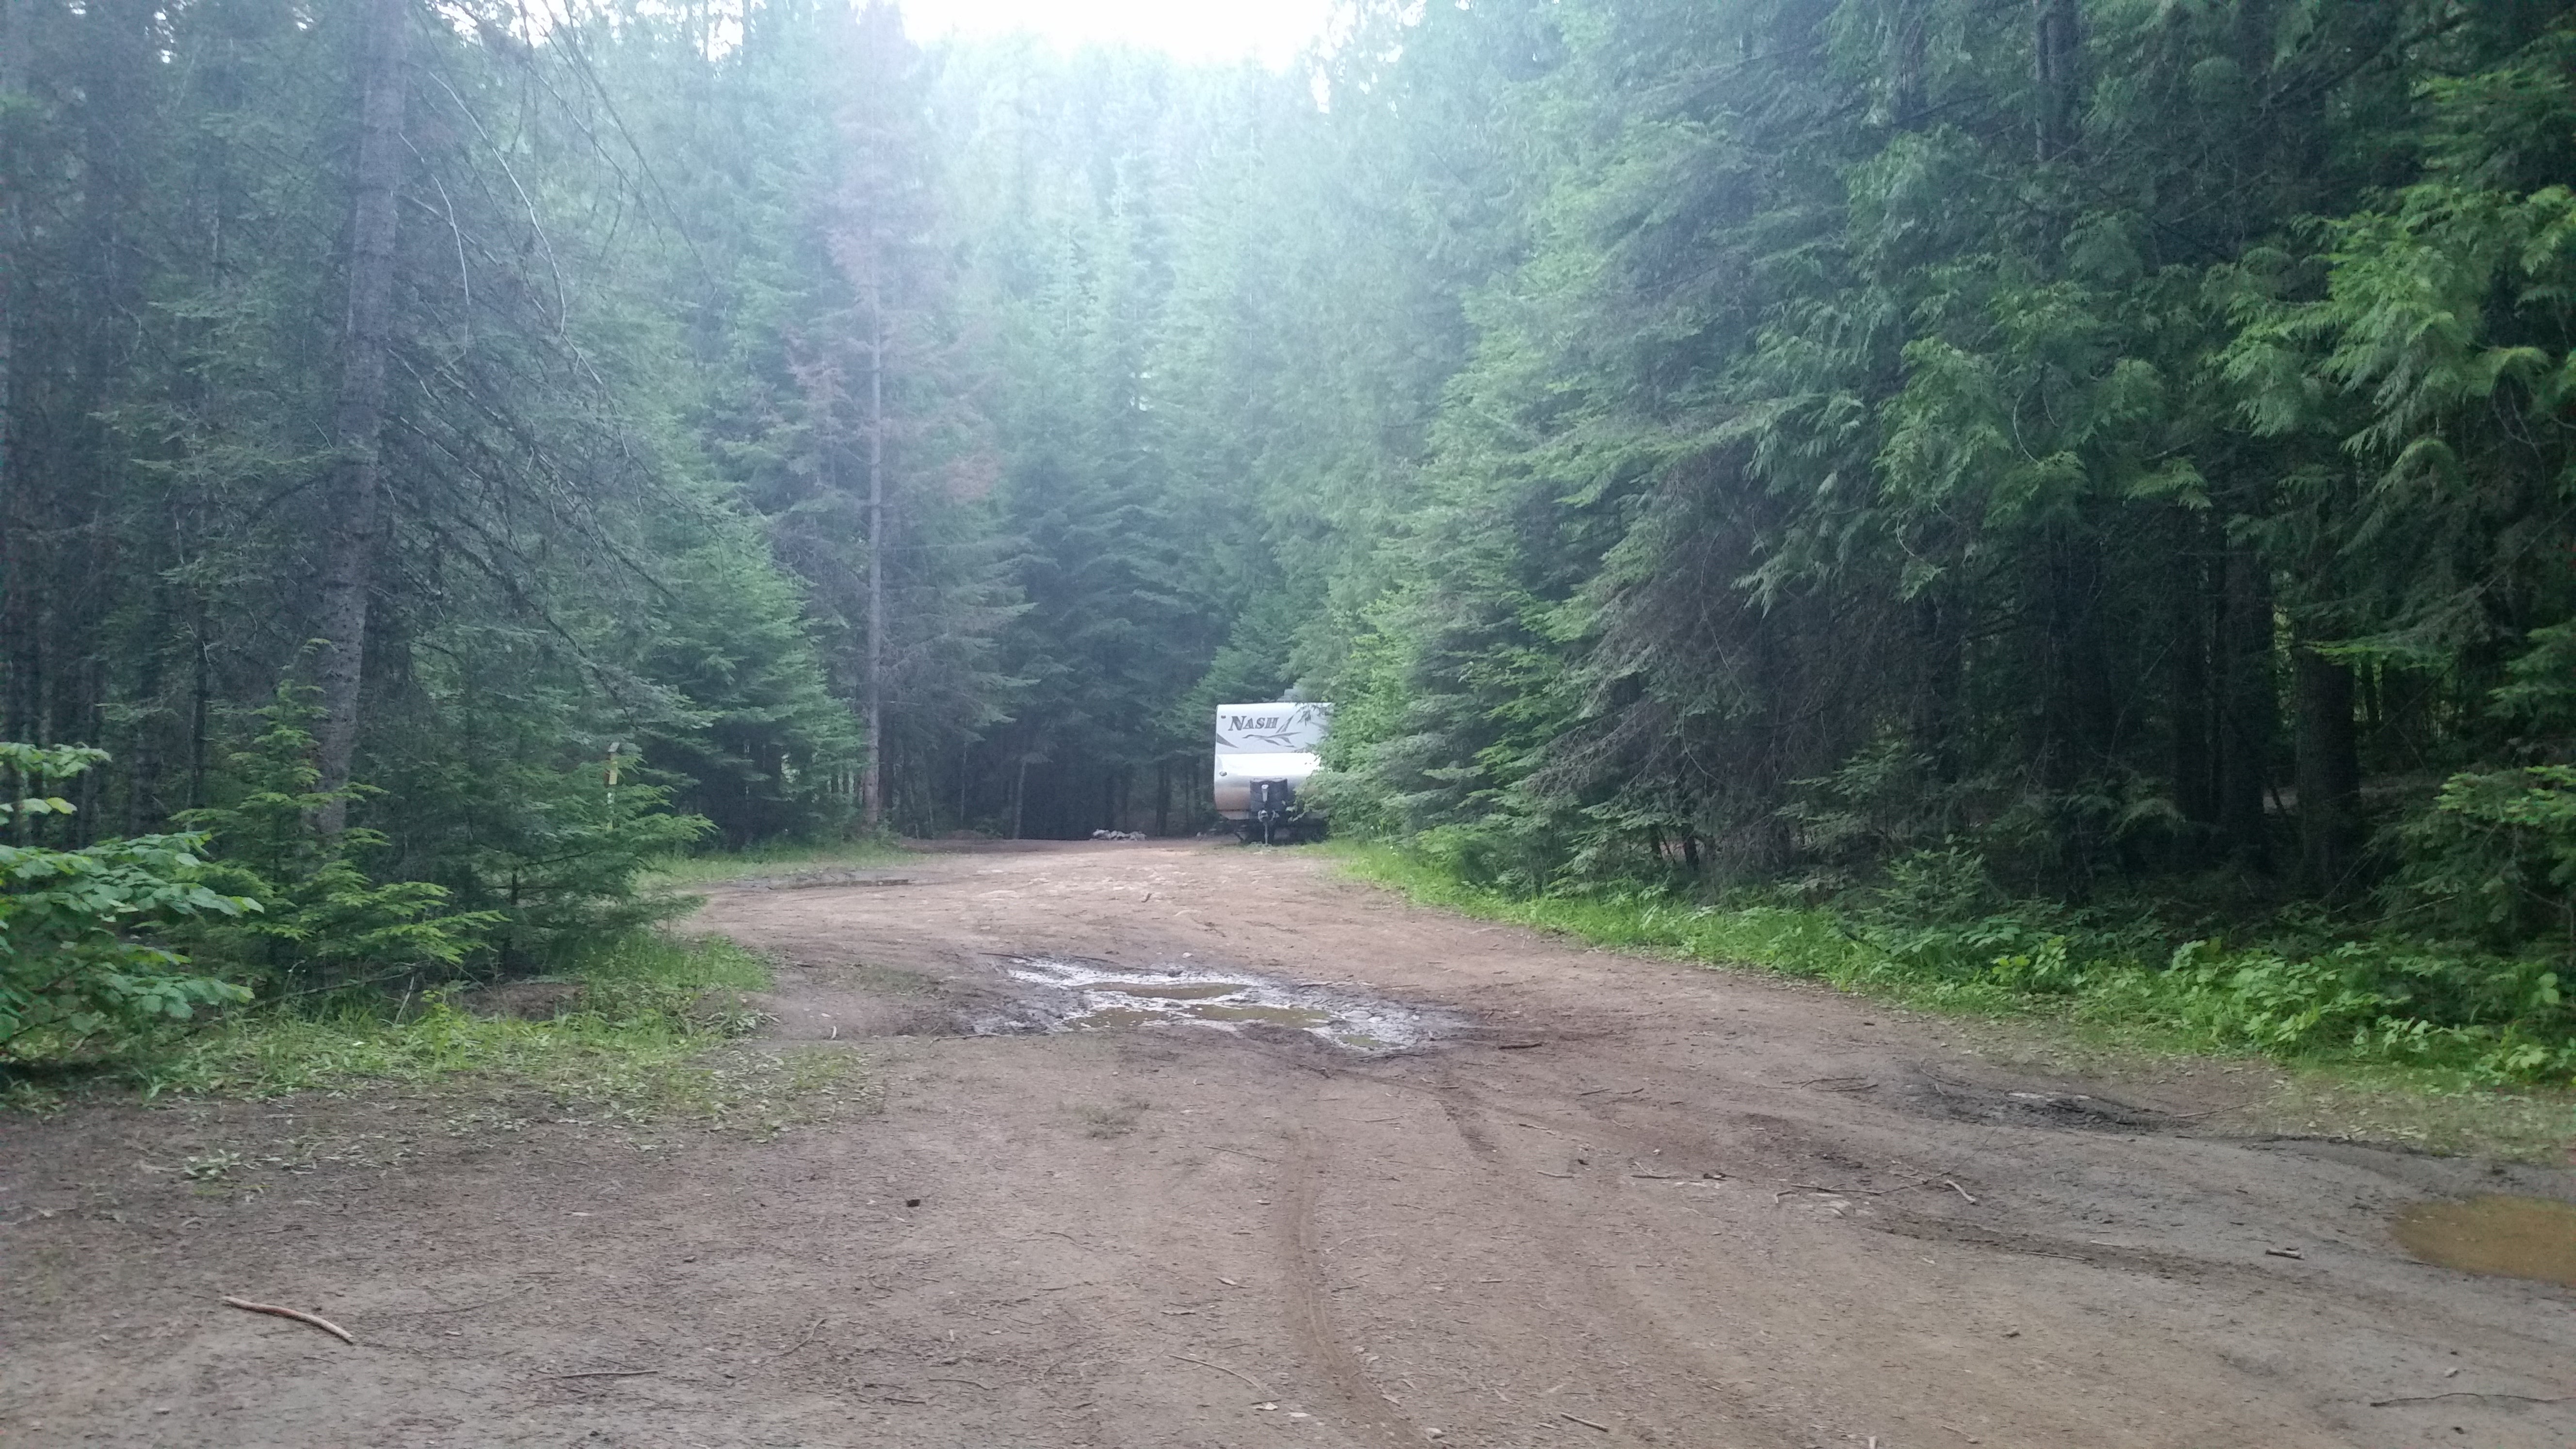 Camp trailer By the entrance on the right